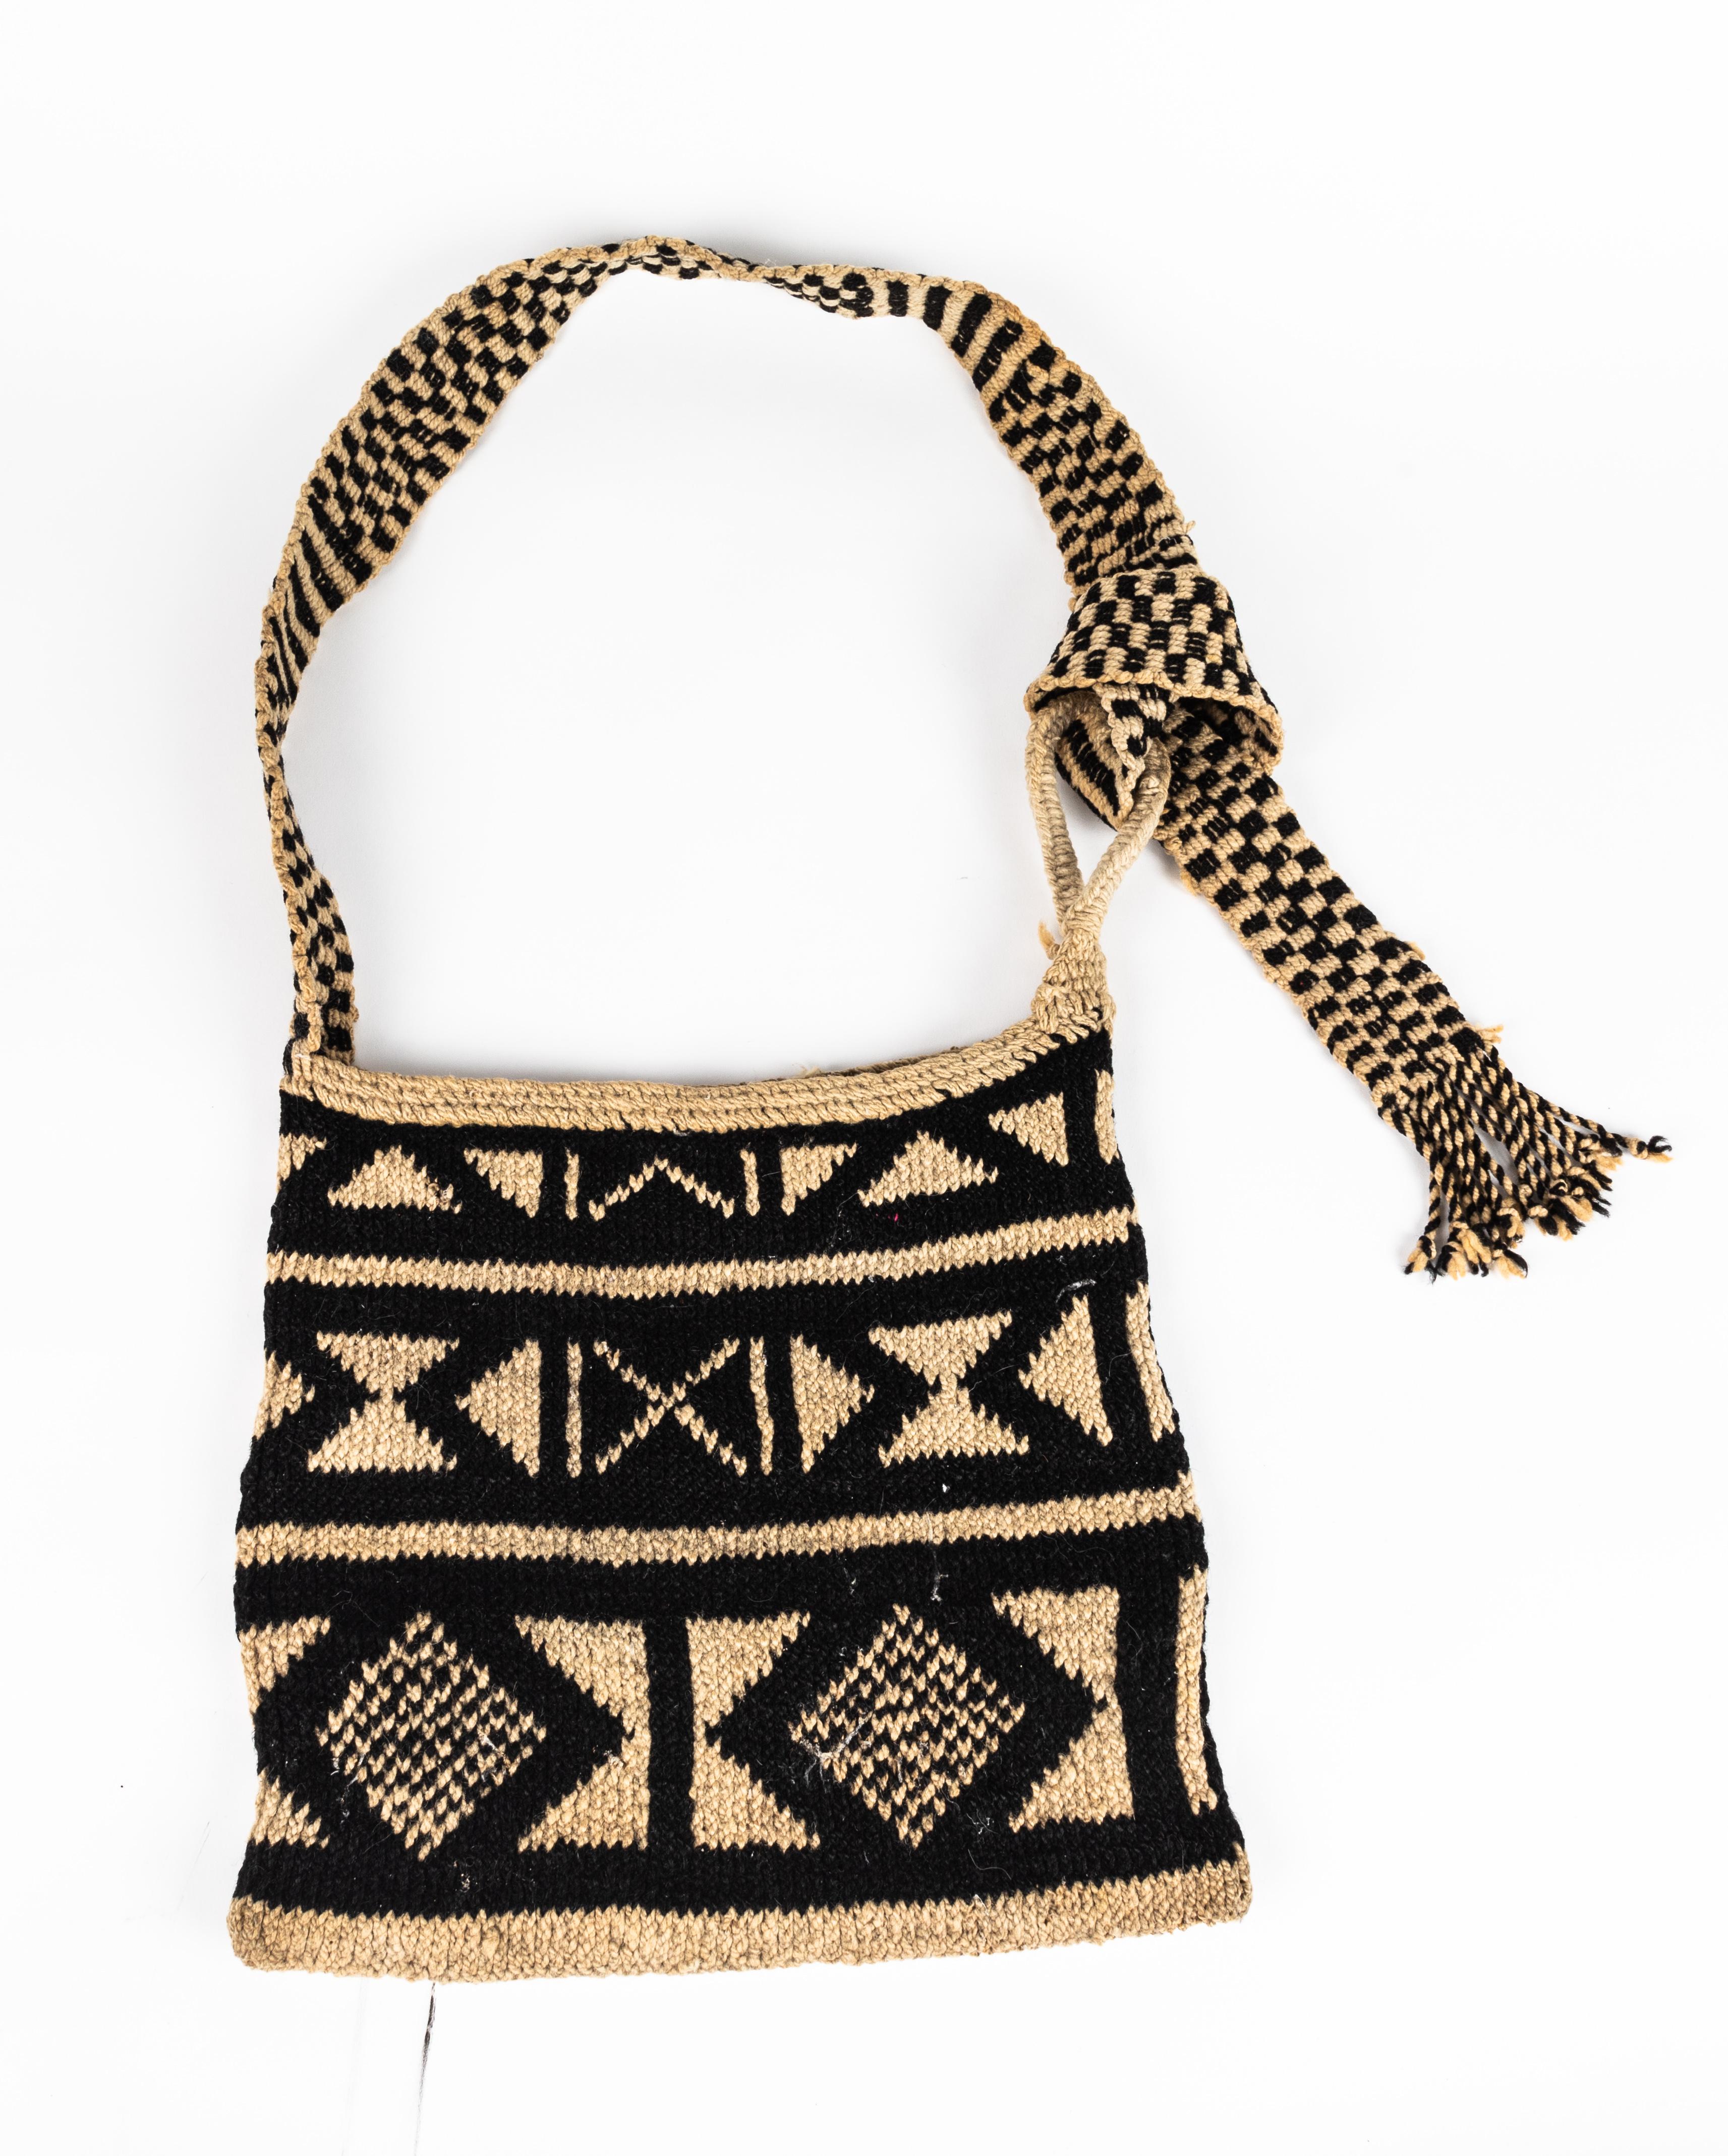 Contemporary Mexican handwoven decorative bag in black and natural pattern. Strap has a 24